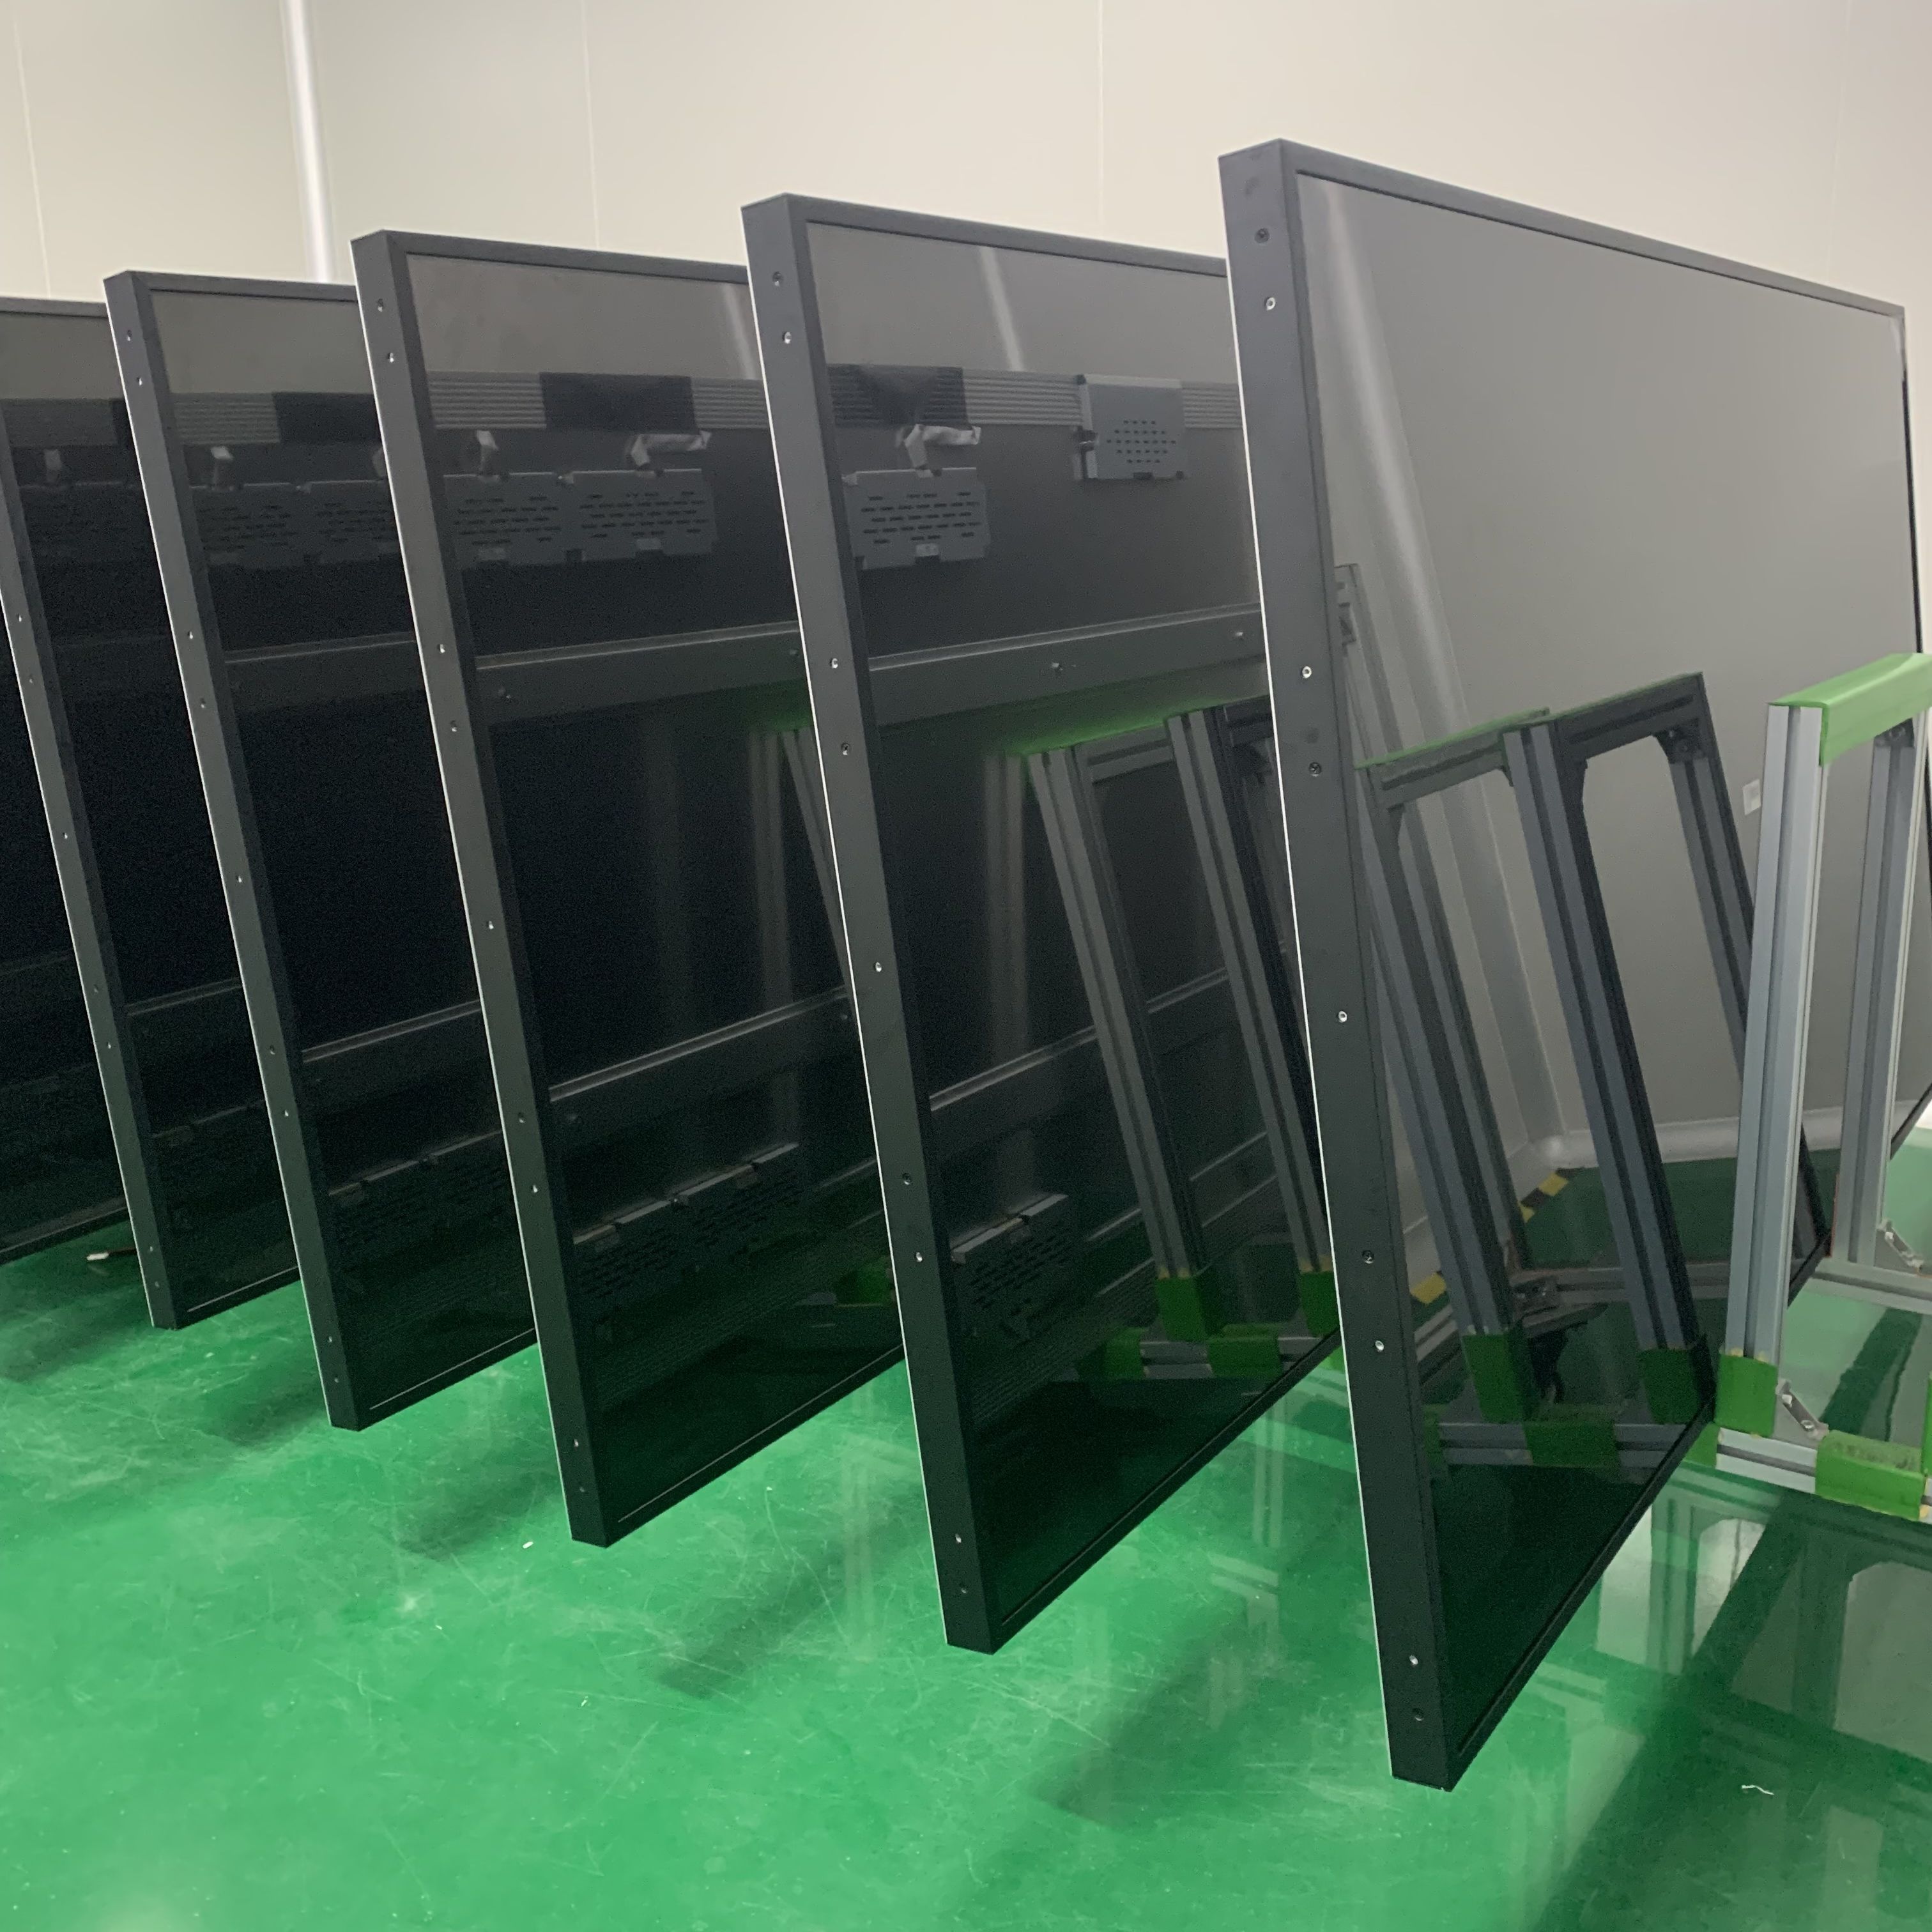 75 inch 2000nits brightness panel for outdoor LCD display module digital signage high quality cheaper price